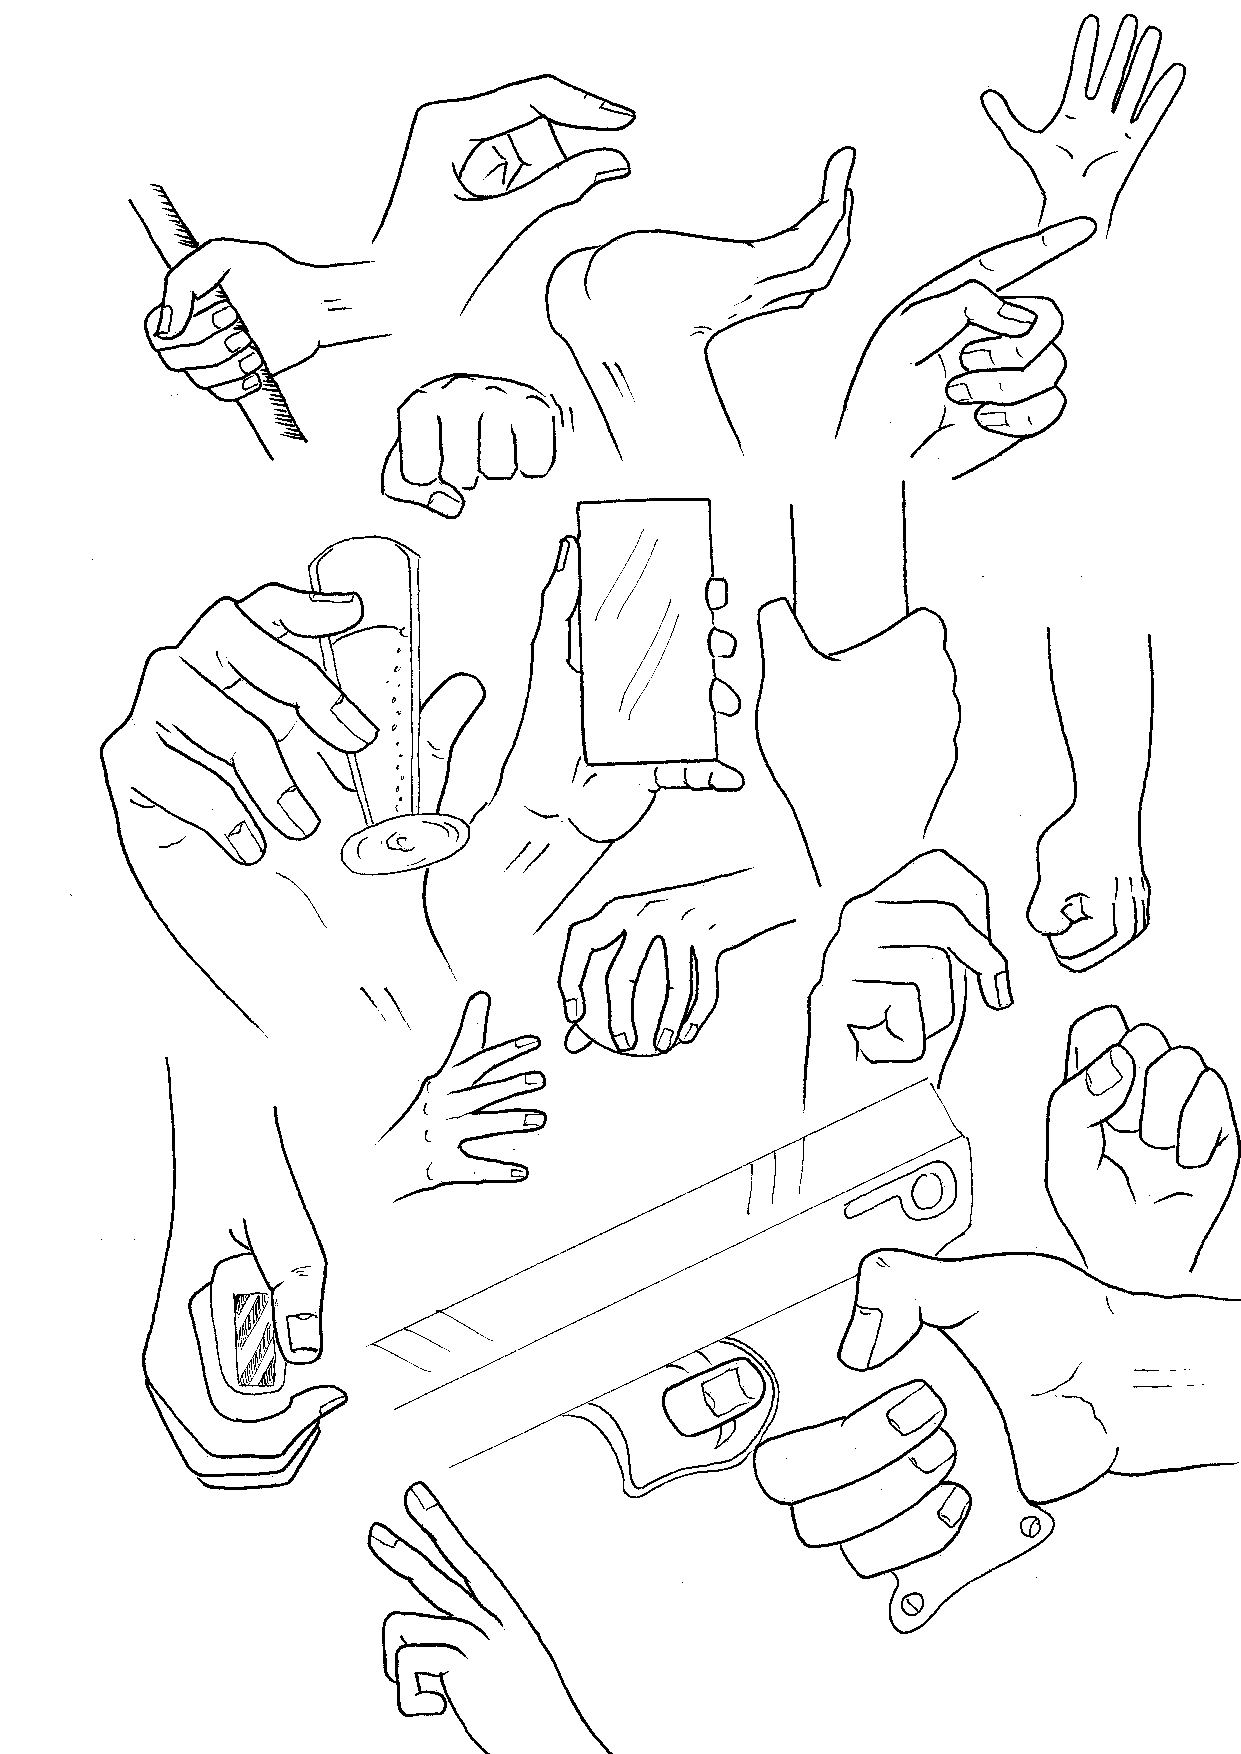 Hand Perspective Drawing at GetDrawings Free download